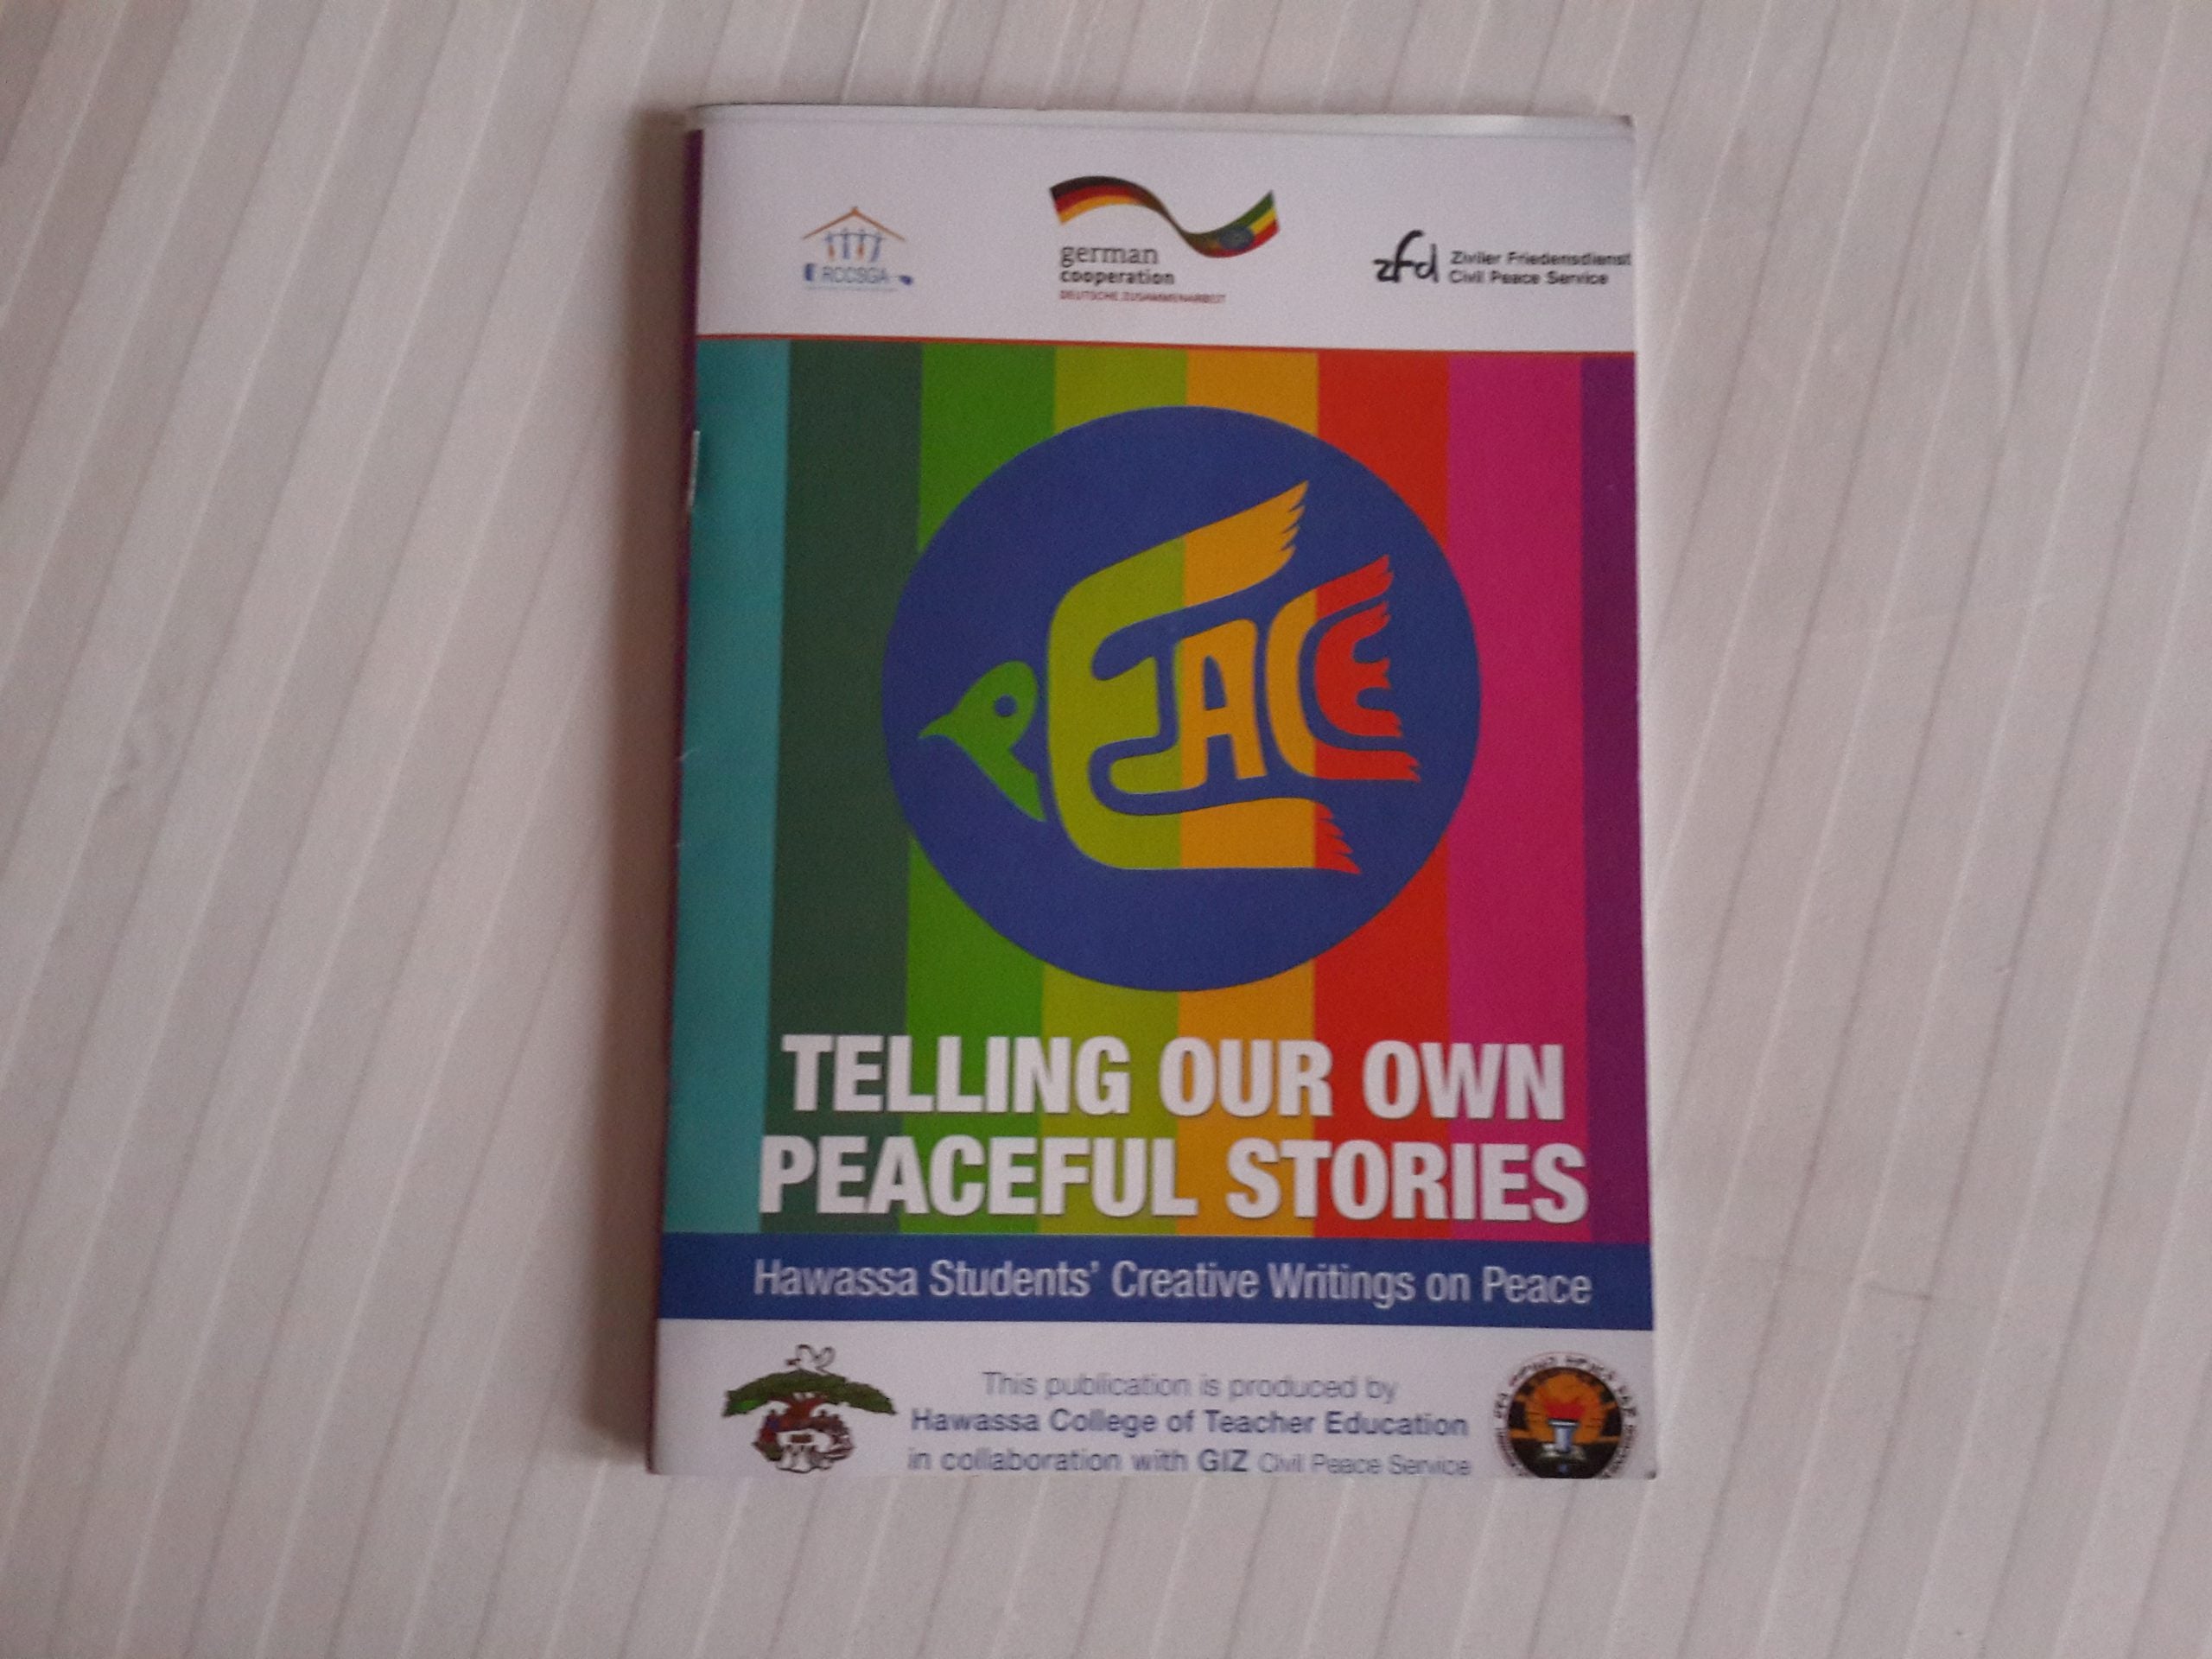 Winning student essays on peace were published in a pamphlet.